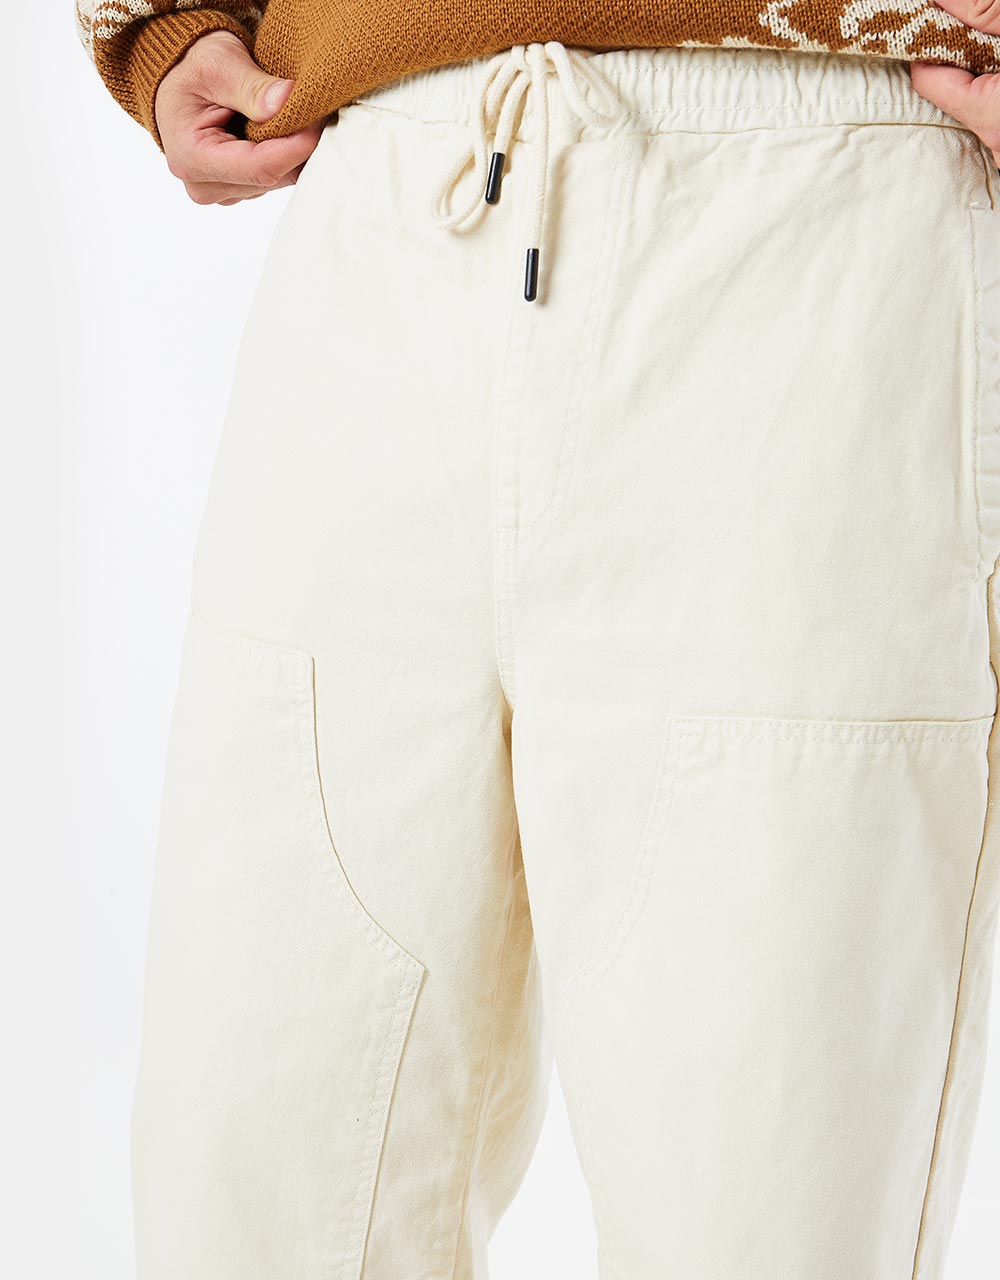 Route One Double Knee Heavyweight Canvas Pants - Angora